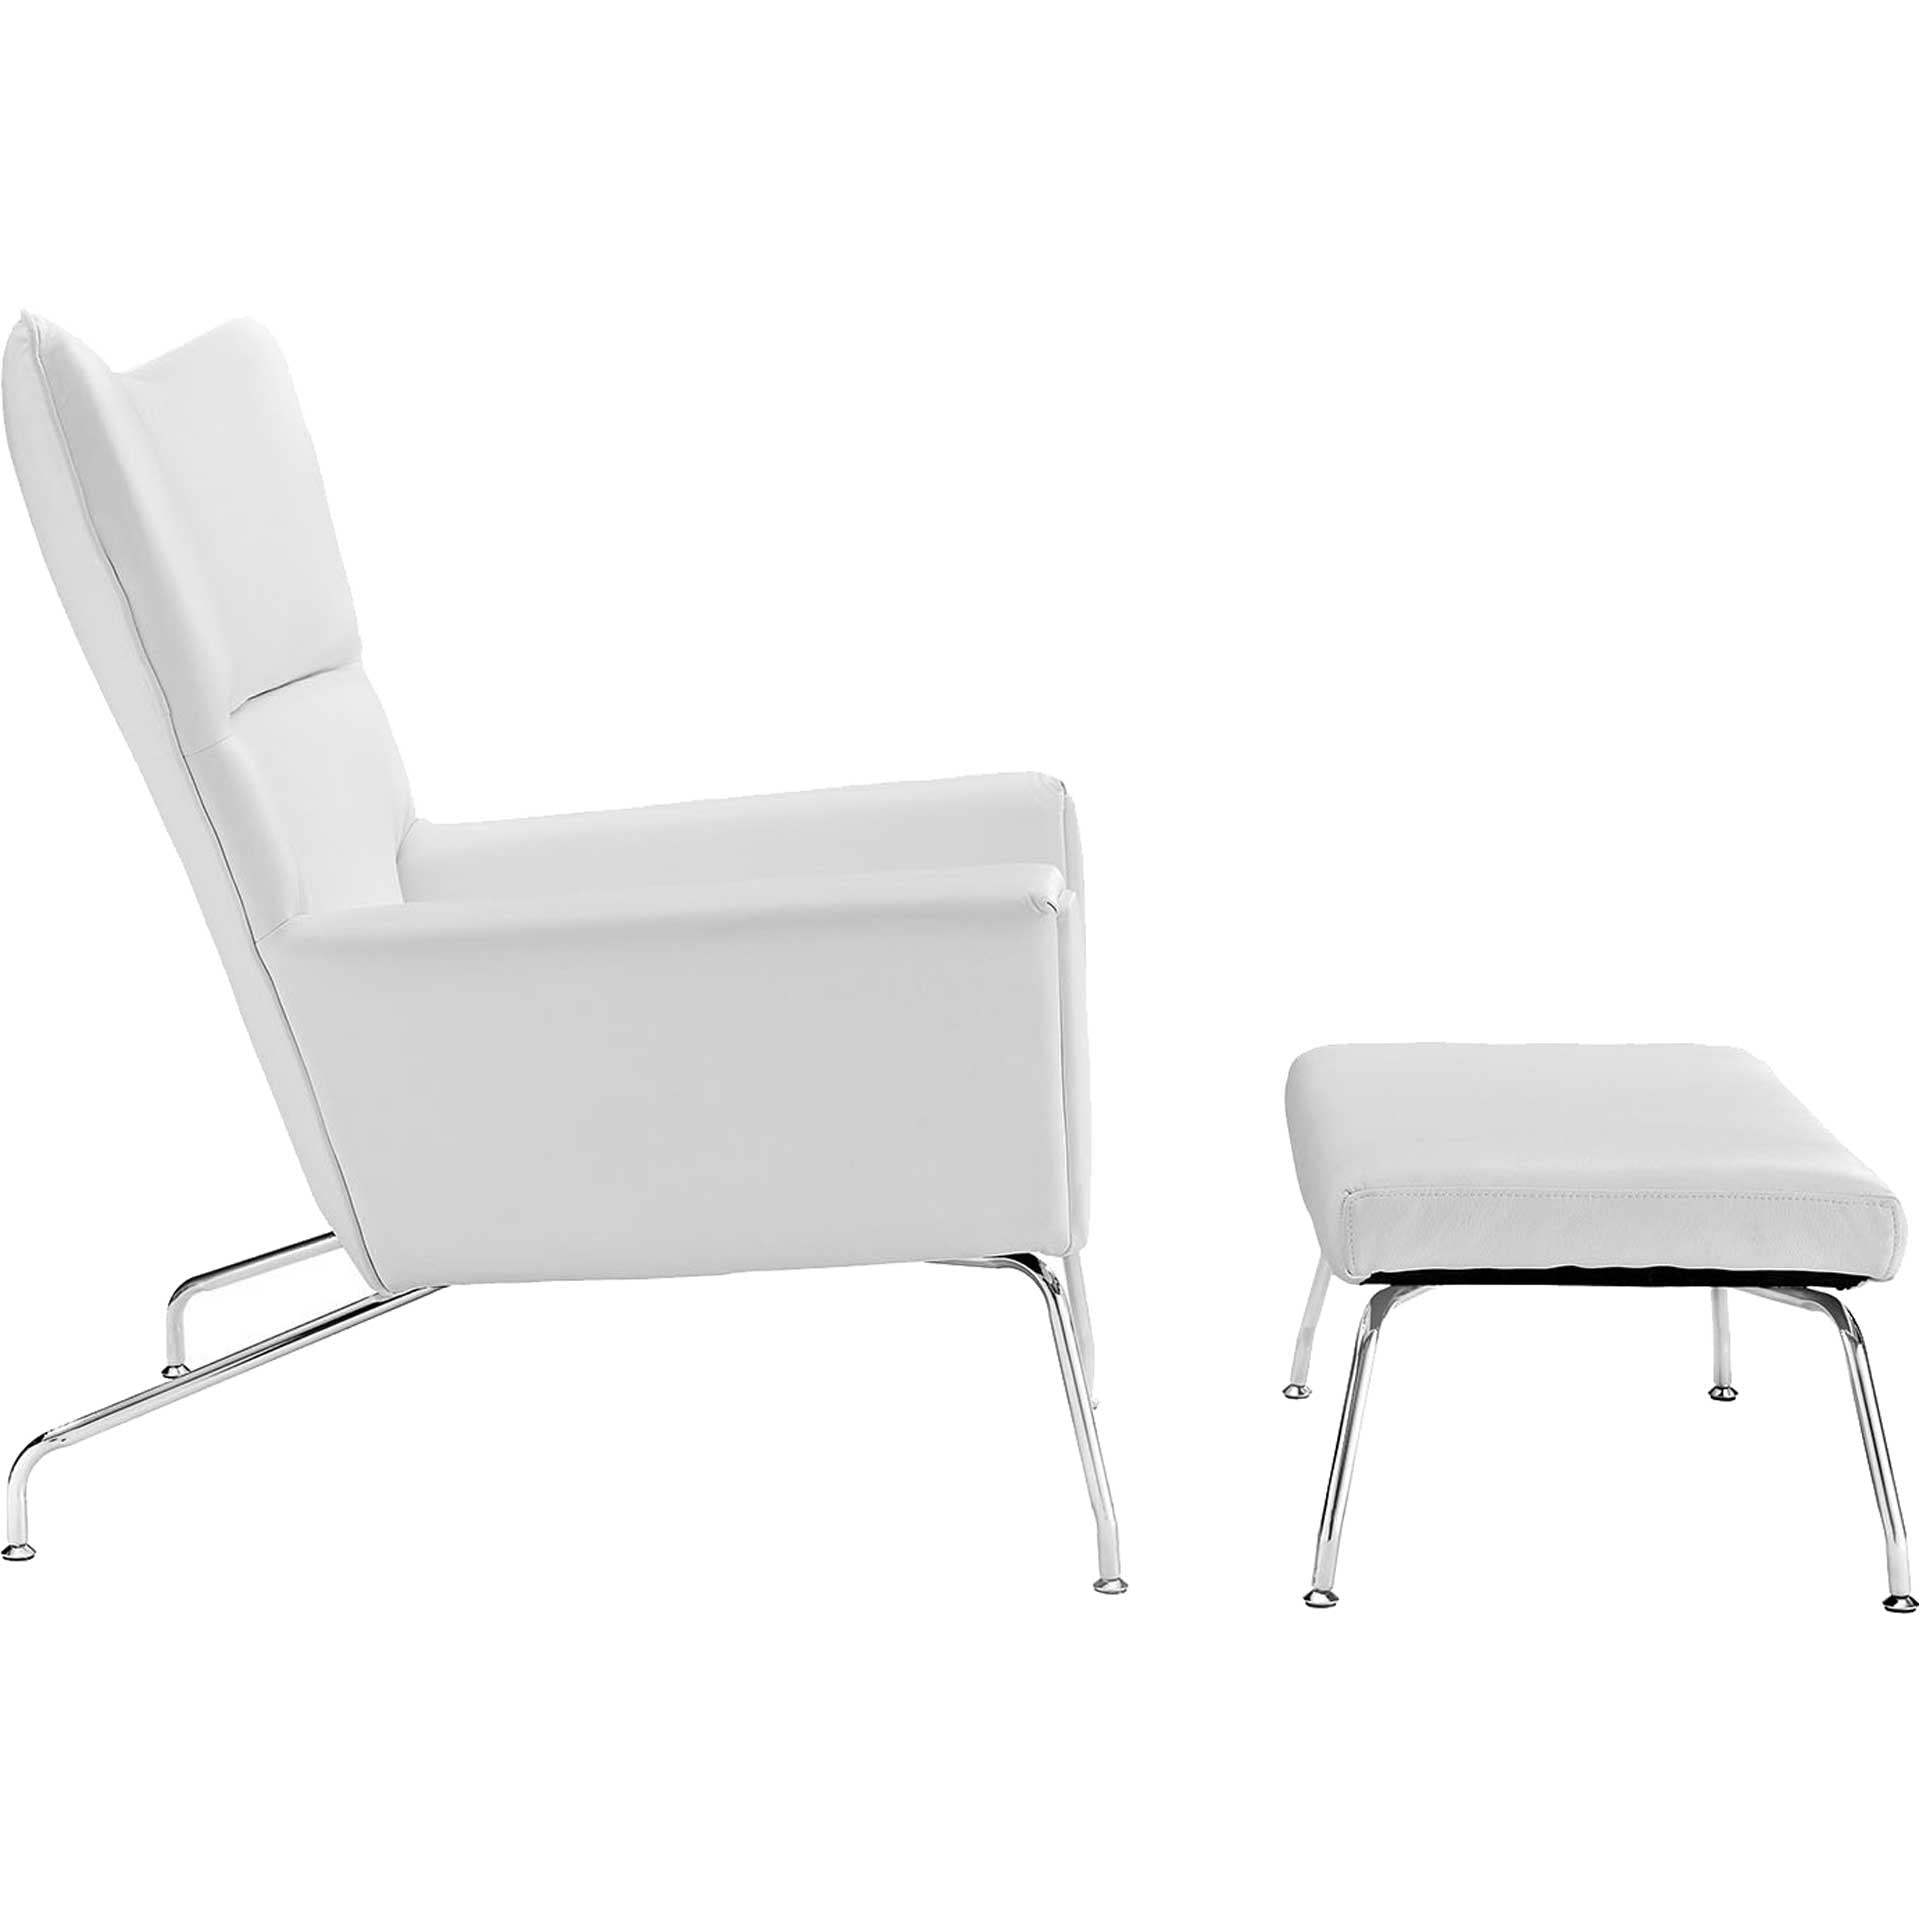 Clarell Leather Lounge Chair White